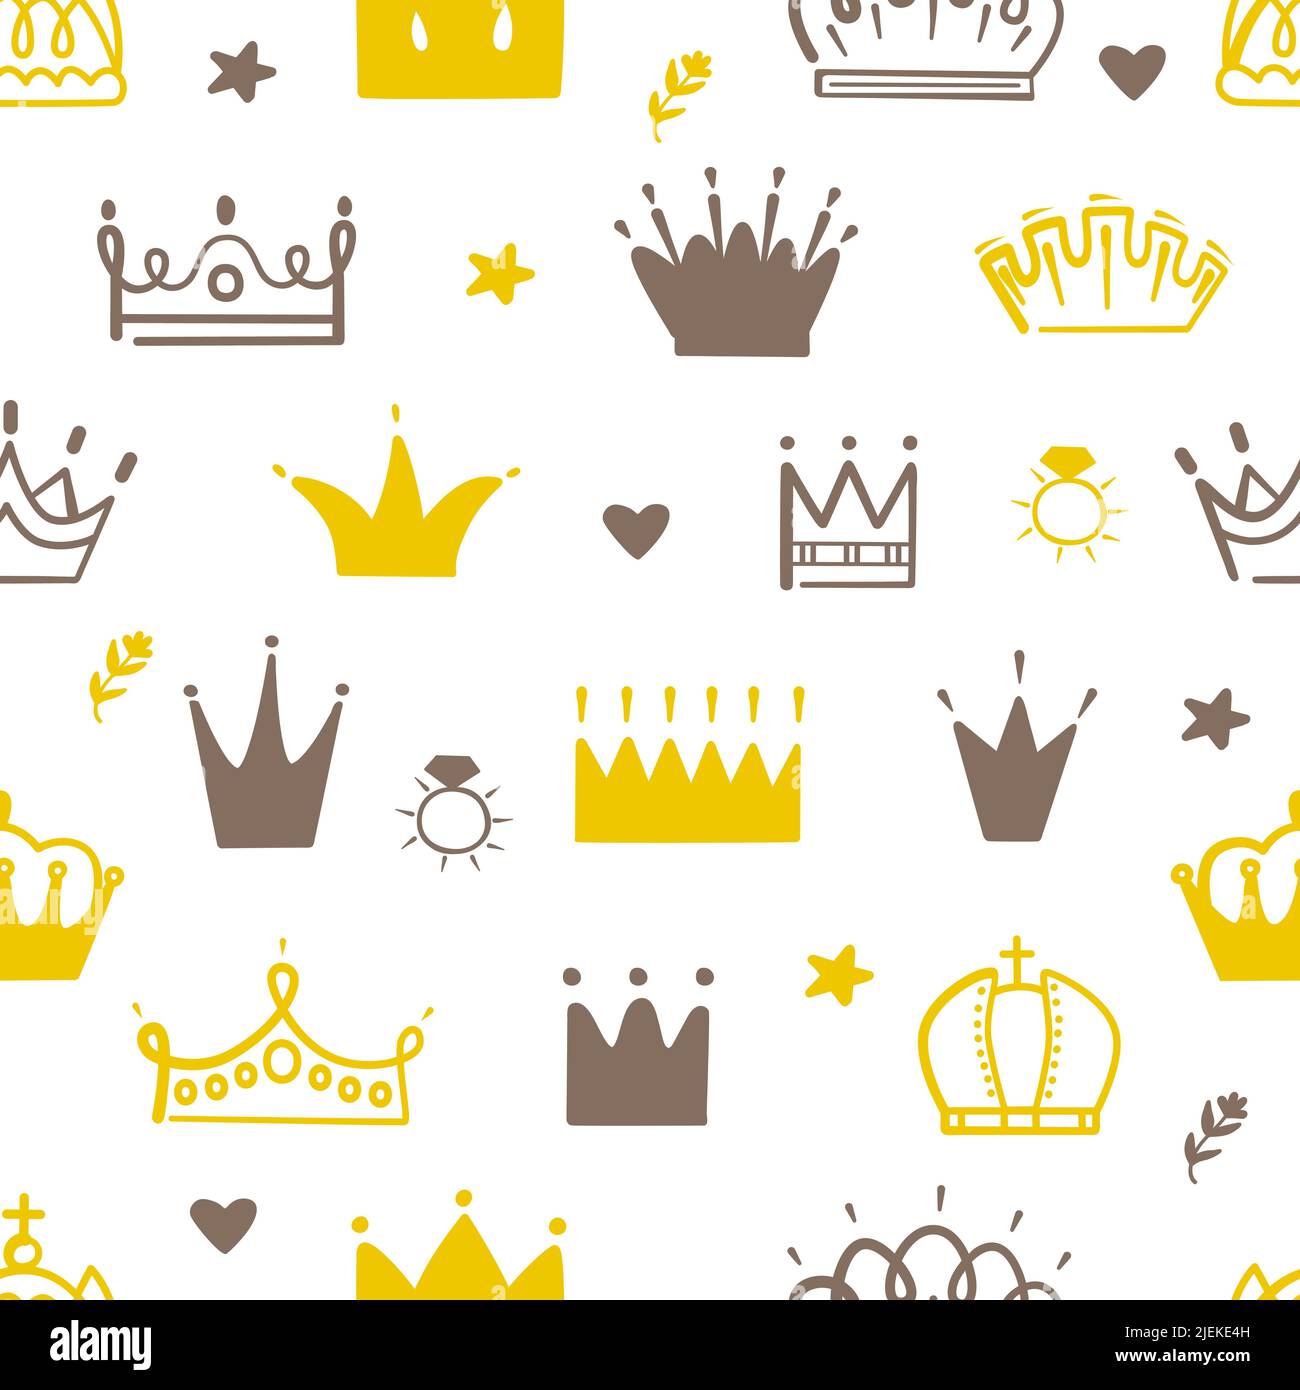 Princess crown seamless pattern. Crowns print, baby queen party background. Cute doodle nursery fabric print, royalty elements neoteric vector texture Stock Vector